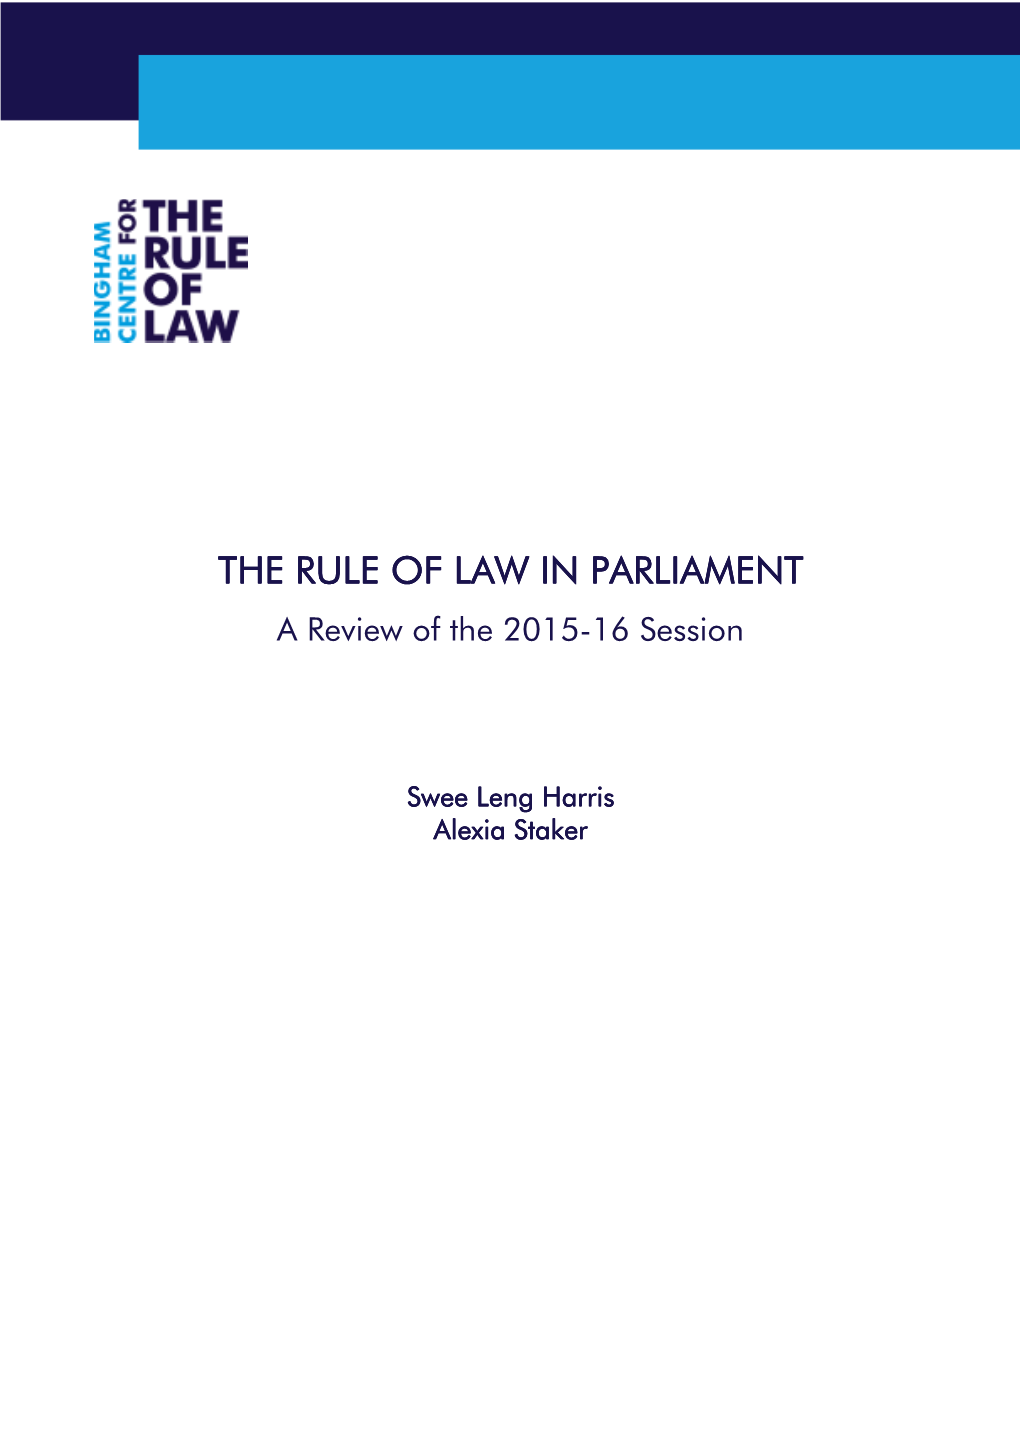 The Rule of Law in Parliament: a Review of the 2015-16 Session , Bingham Centre for the Rule of Law, 2017